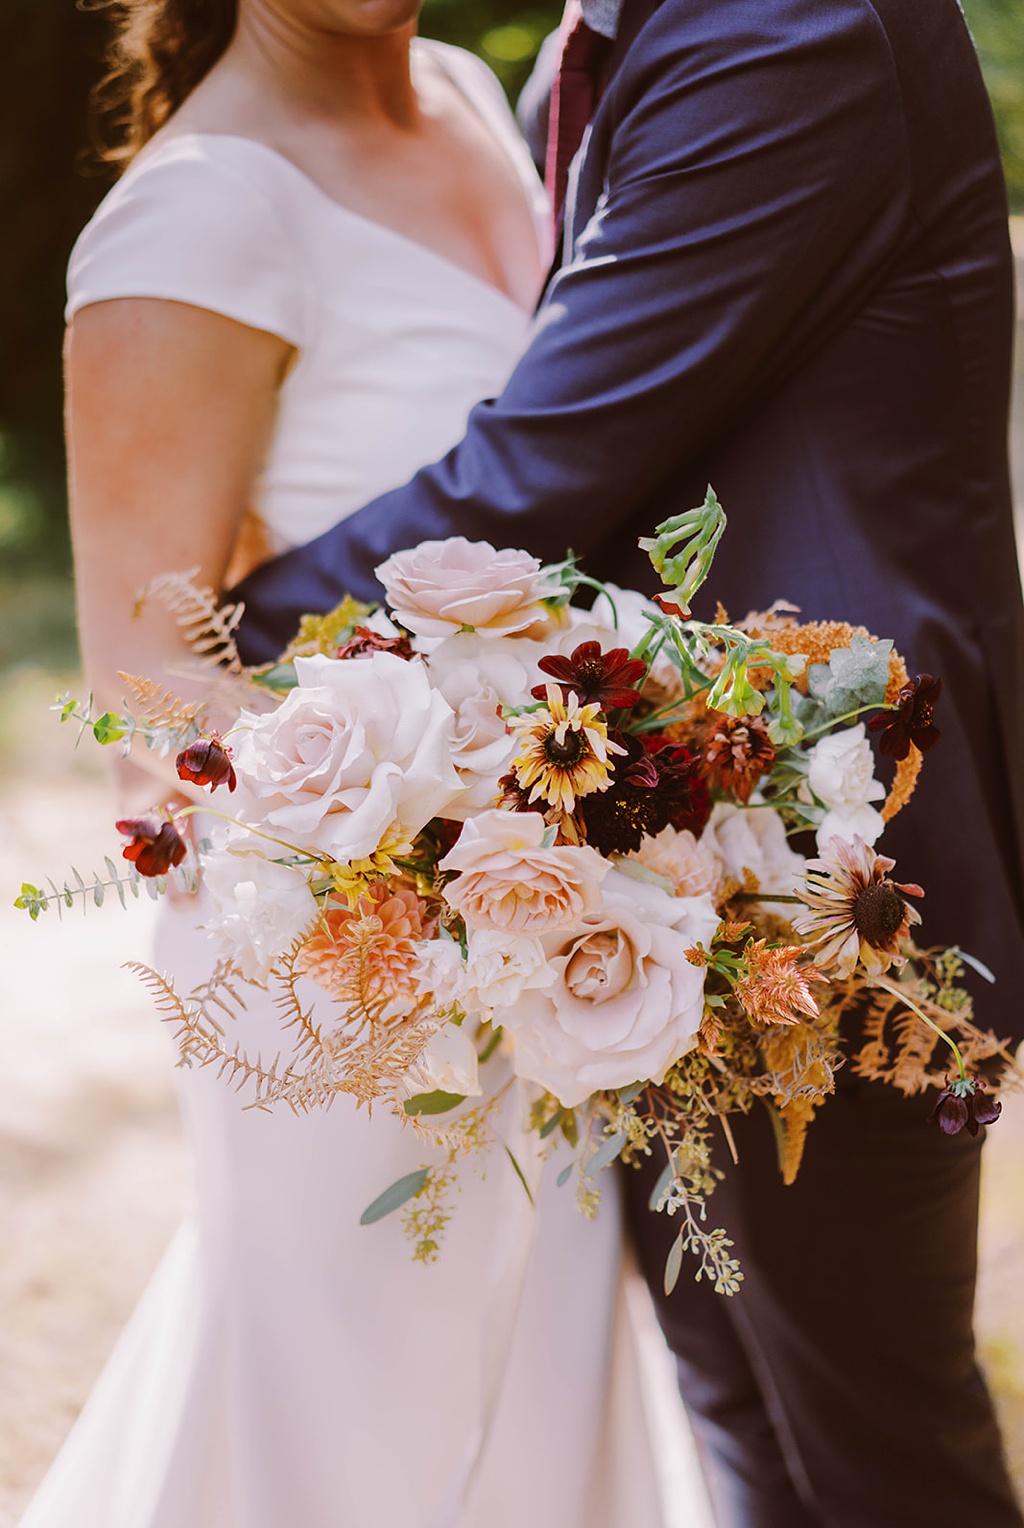 The couple holds a wedding bouquet for their late summer wedding